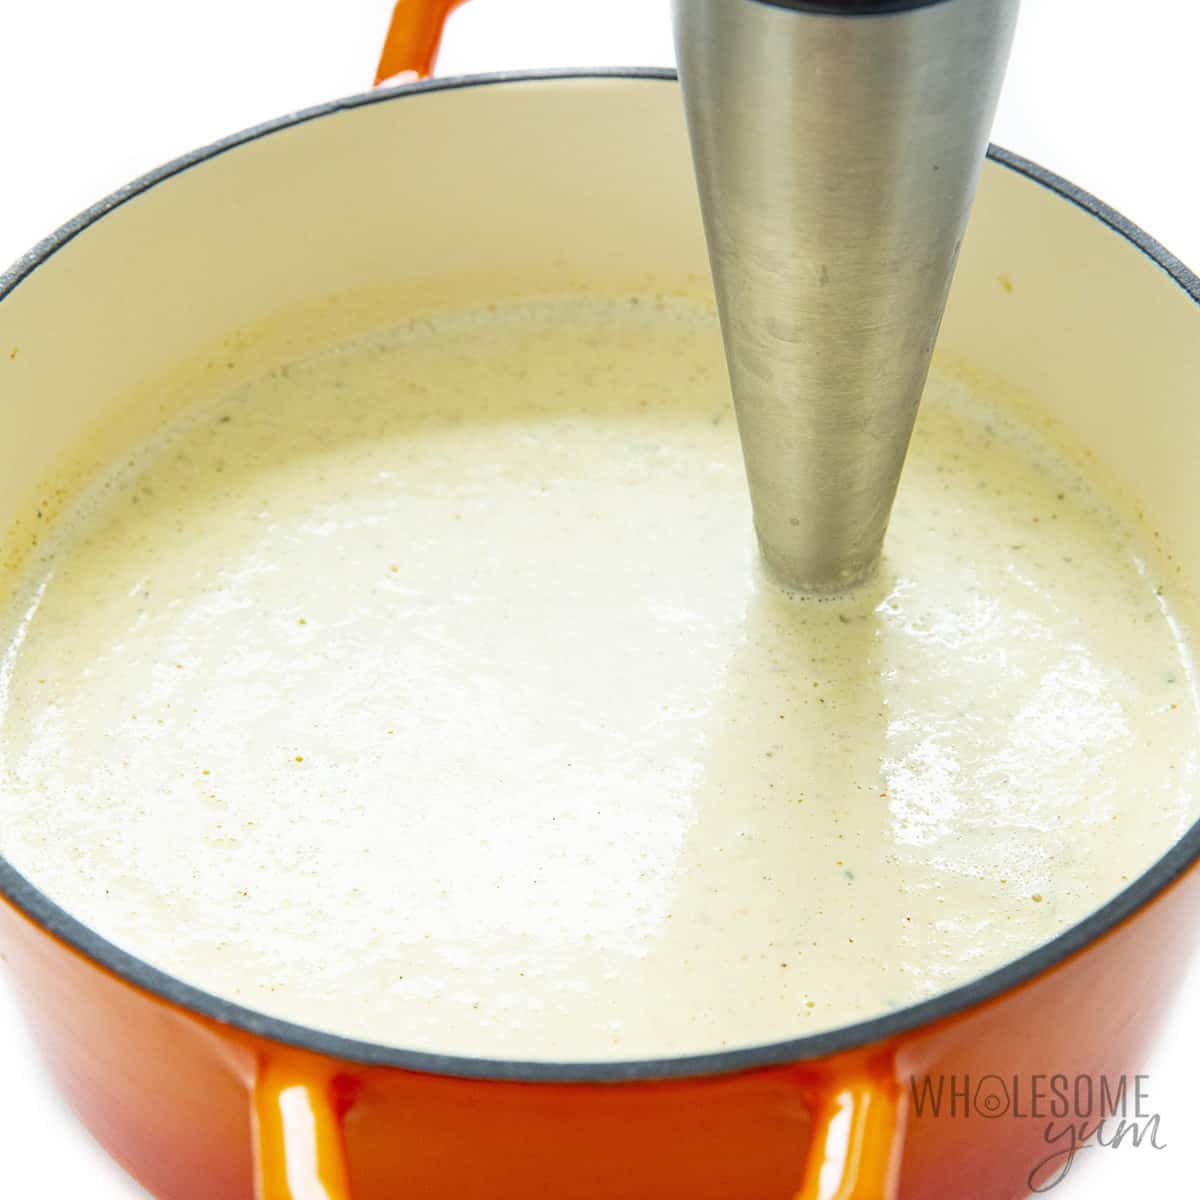 Soup blended with an immersion blender.